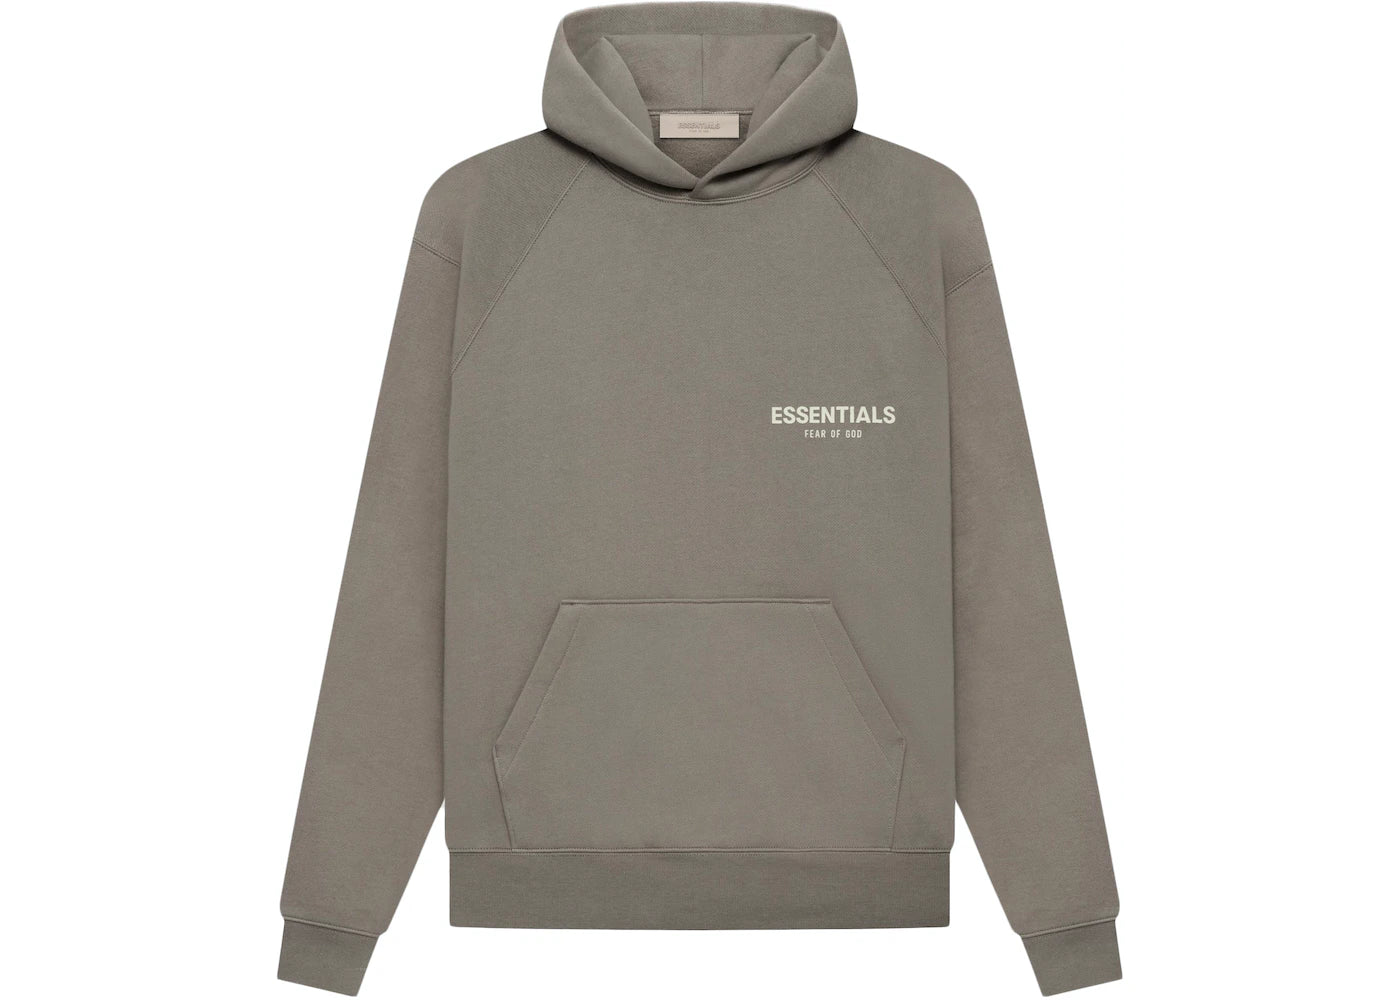 Fear of God Essentials Hoodie Desert Taupe - Used